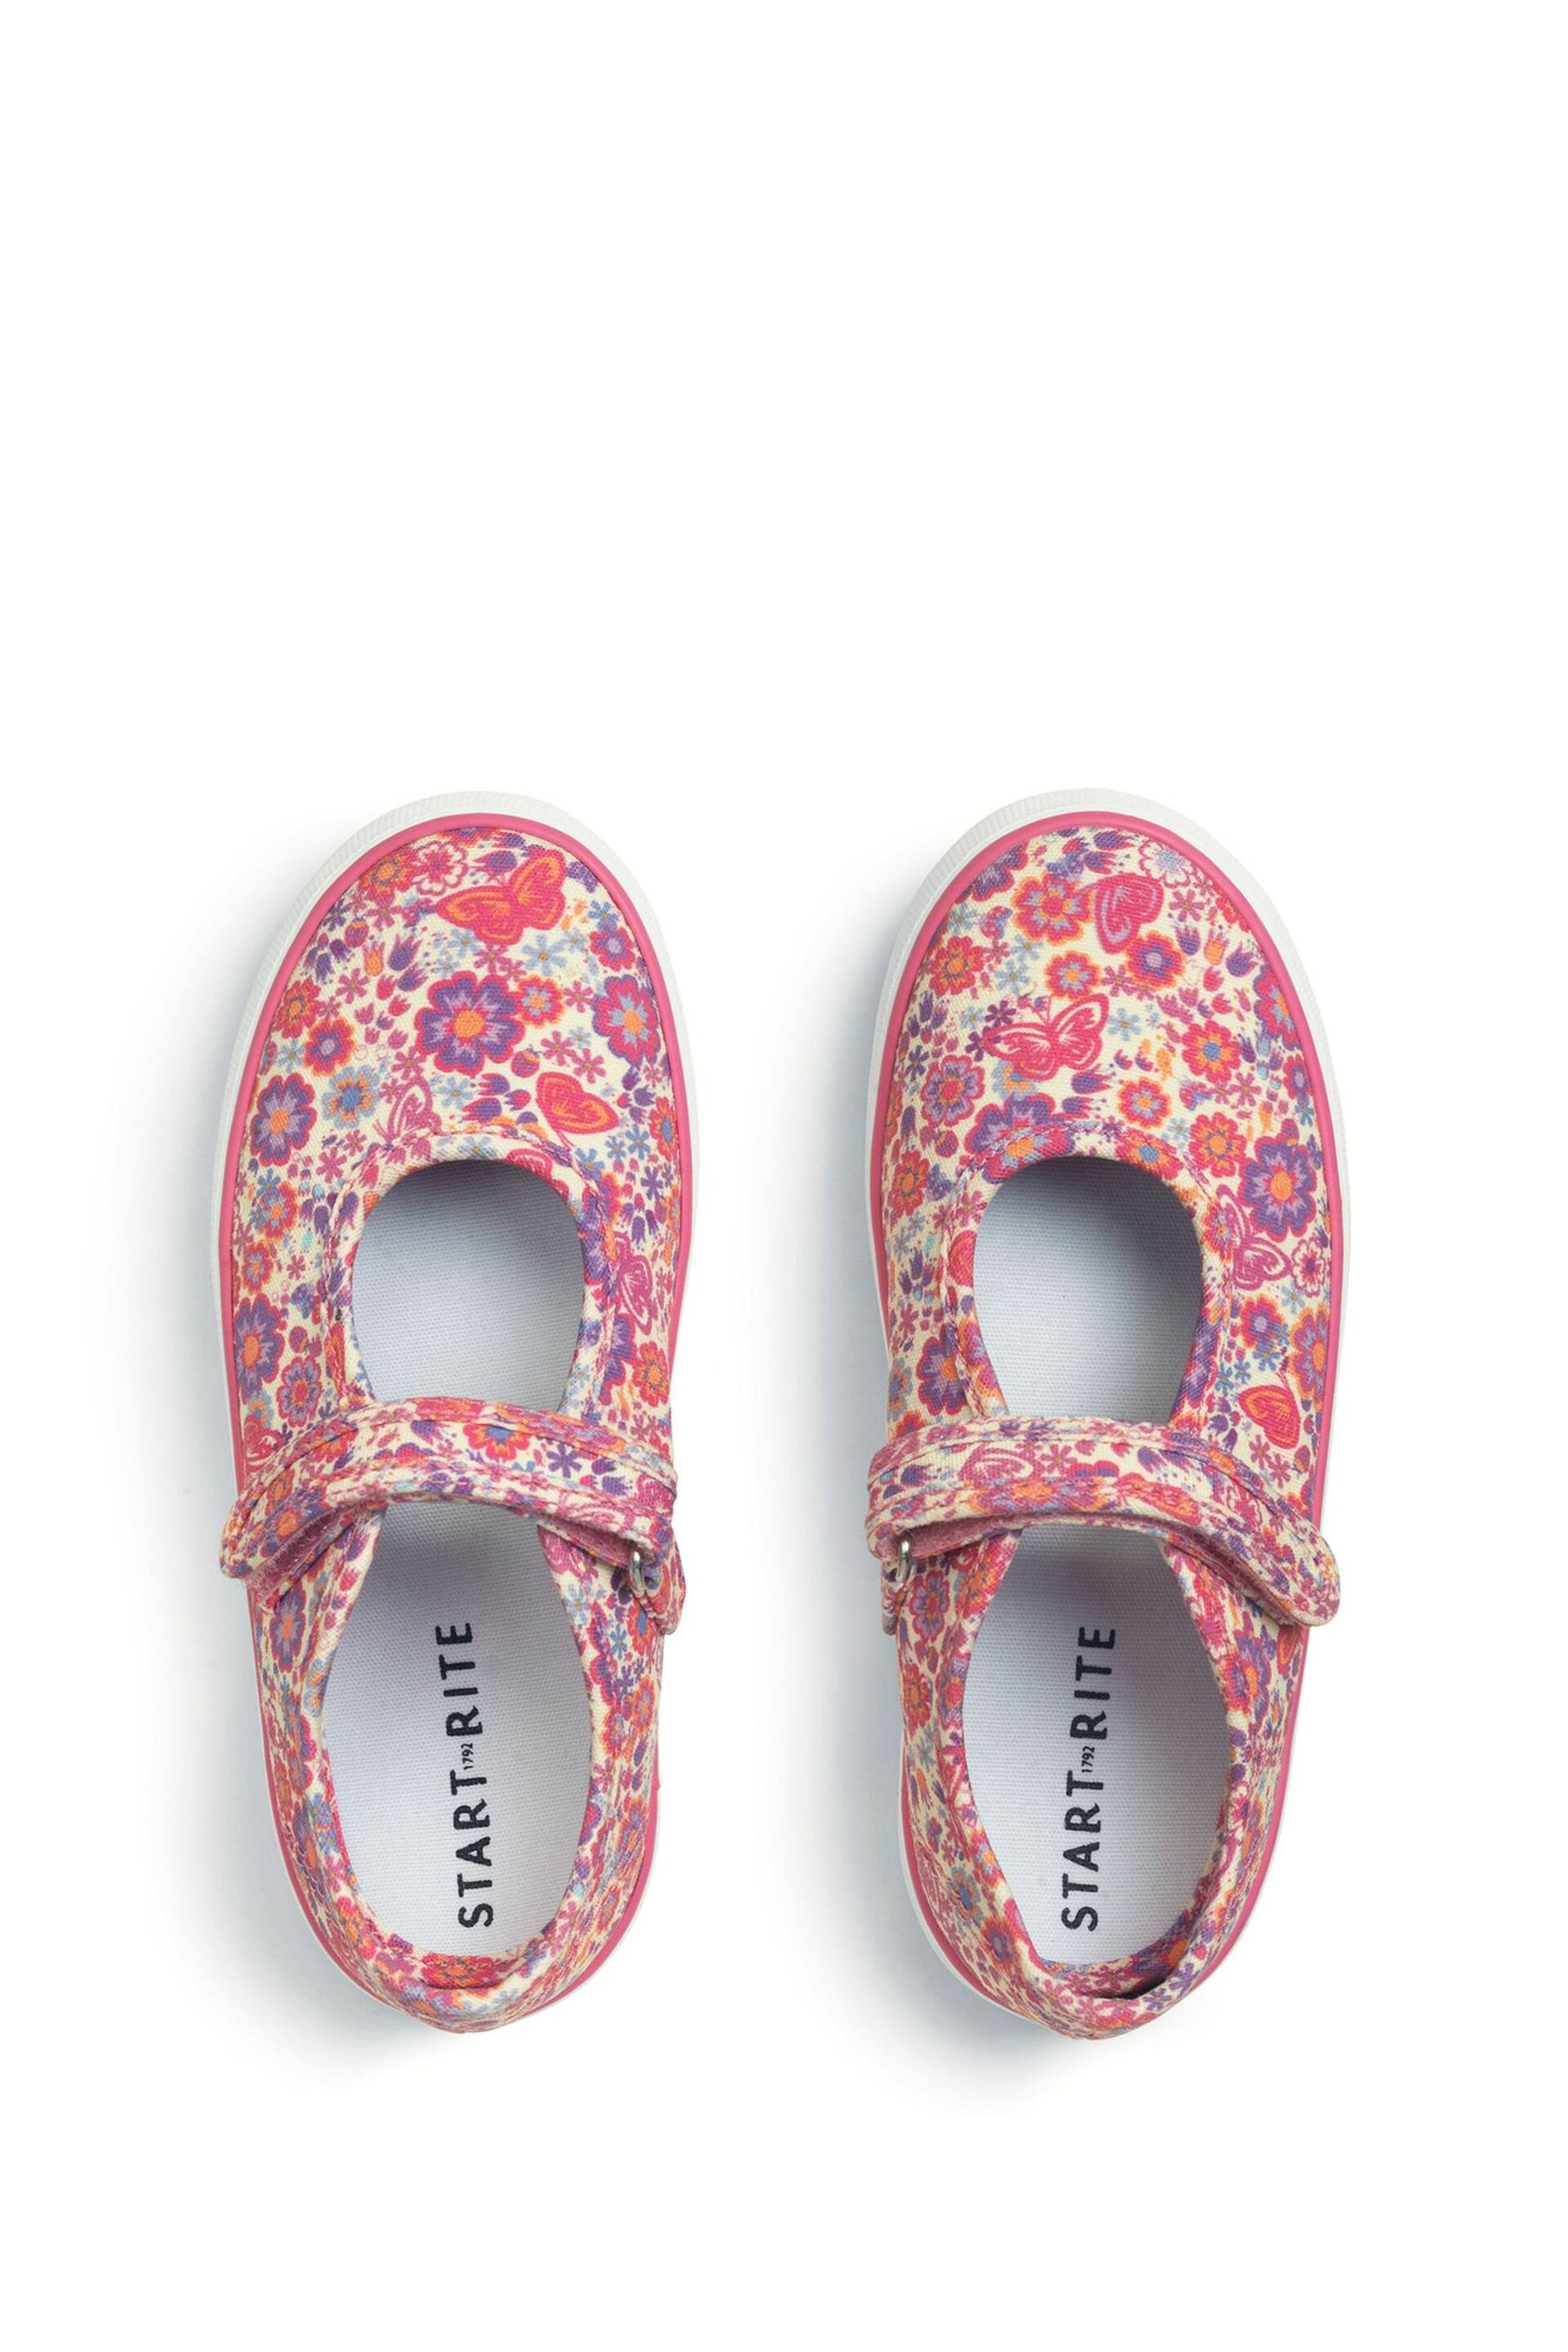 Start Rite Busy Lizzie Pink Floral Canvas Riptape Shoes - Image 4 of 5